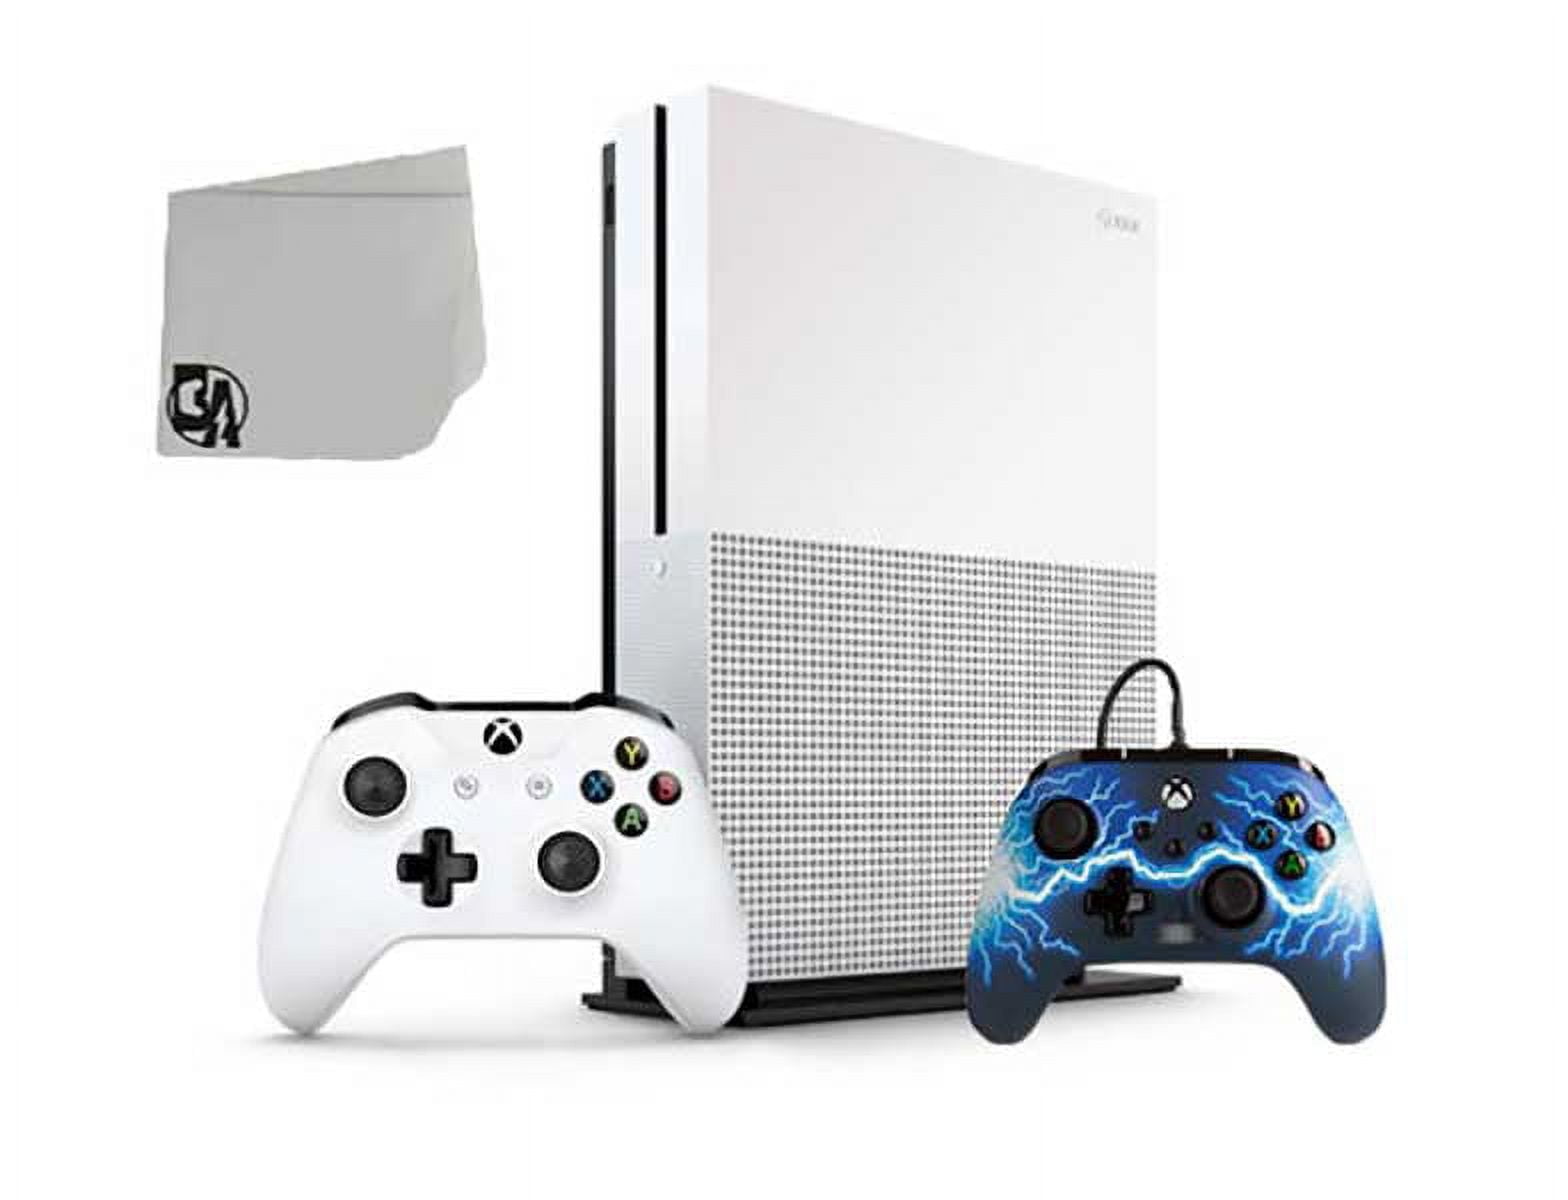 Microsoft 234-00051 Xbox One S White 1TB Gaming Console with Aurora  Borealis Controller Included BOLT AXTION Bundle Like New